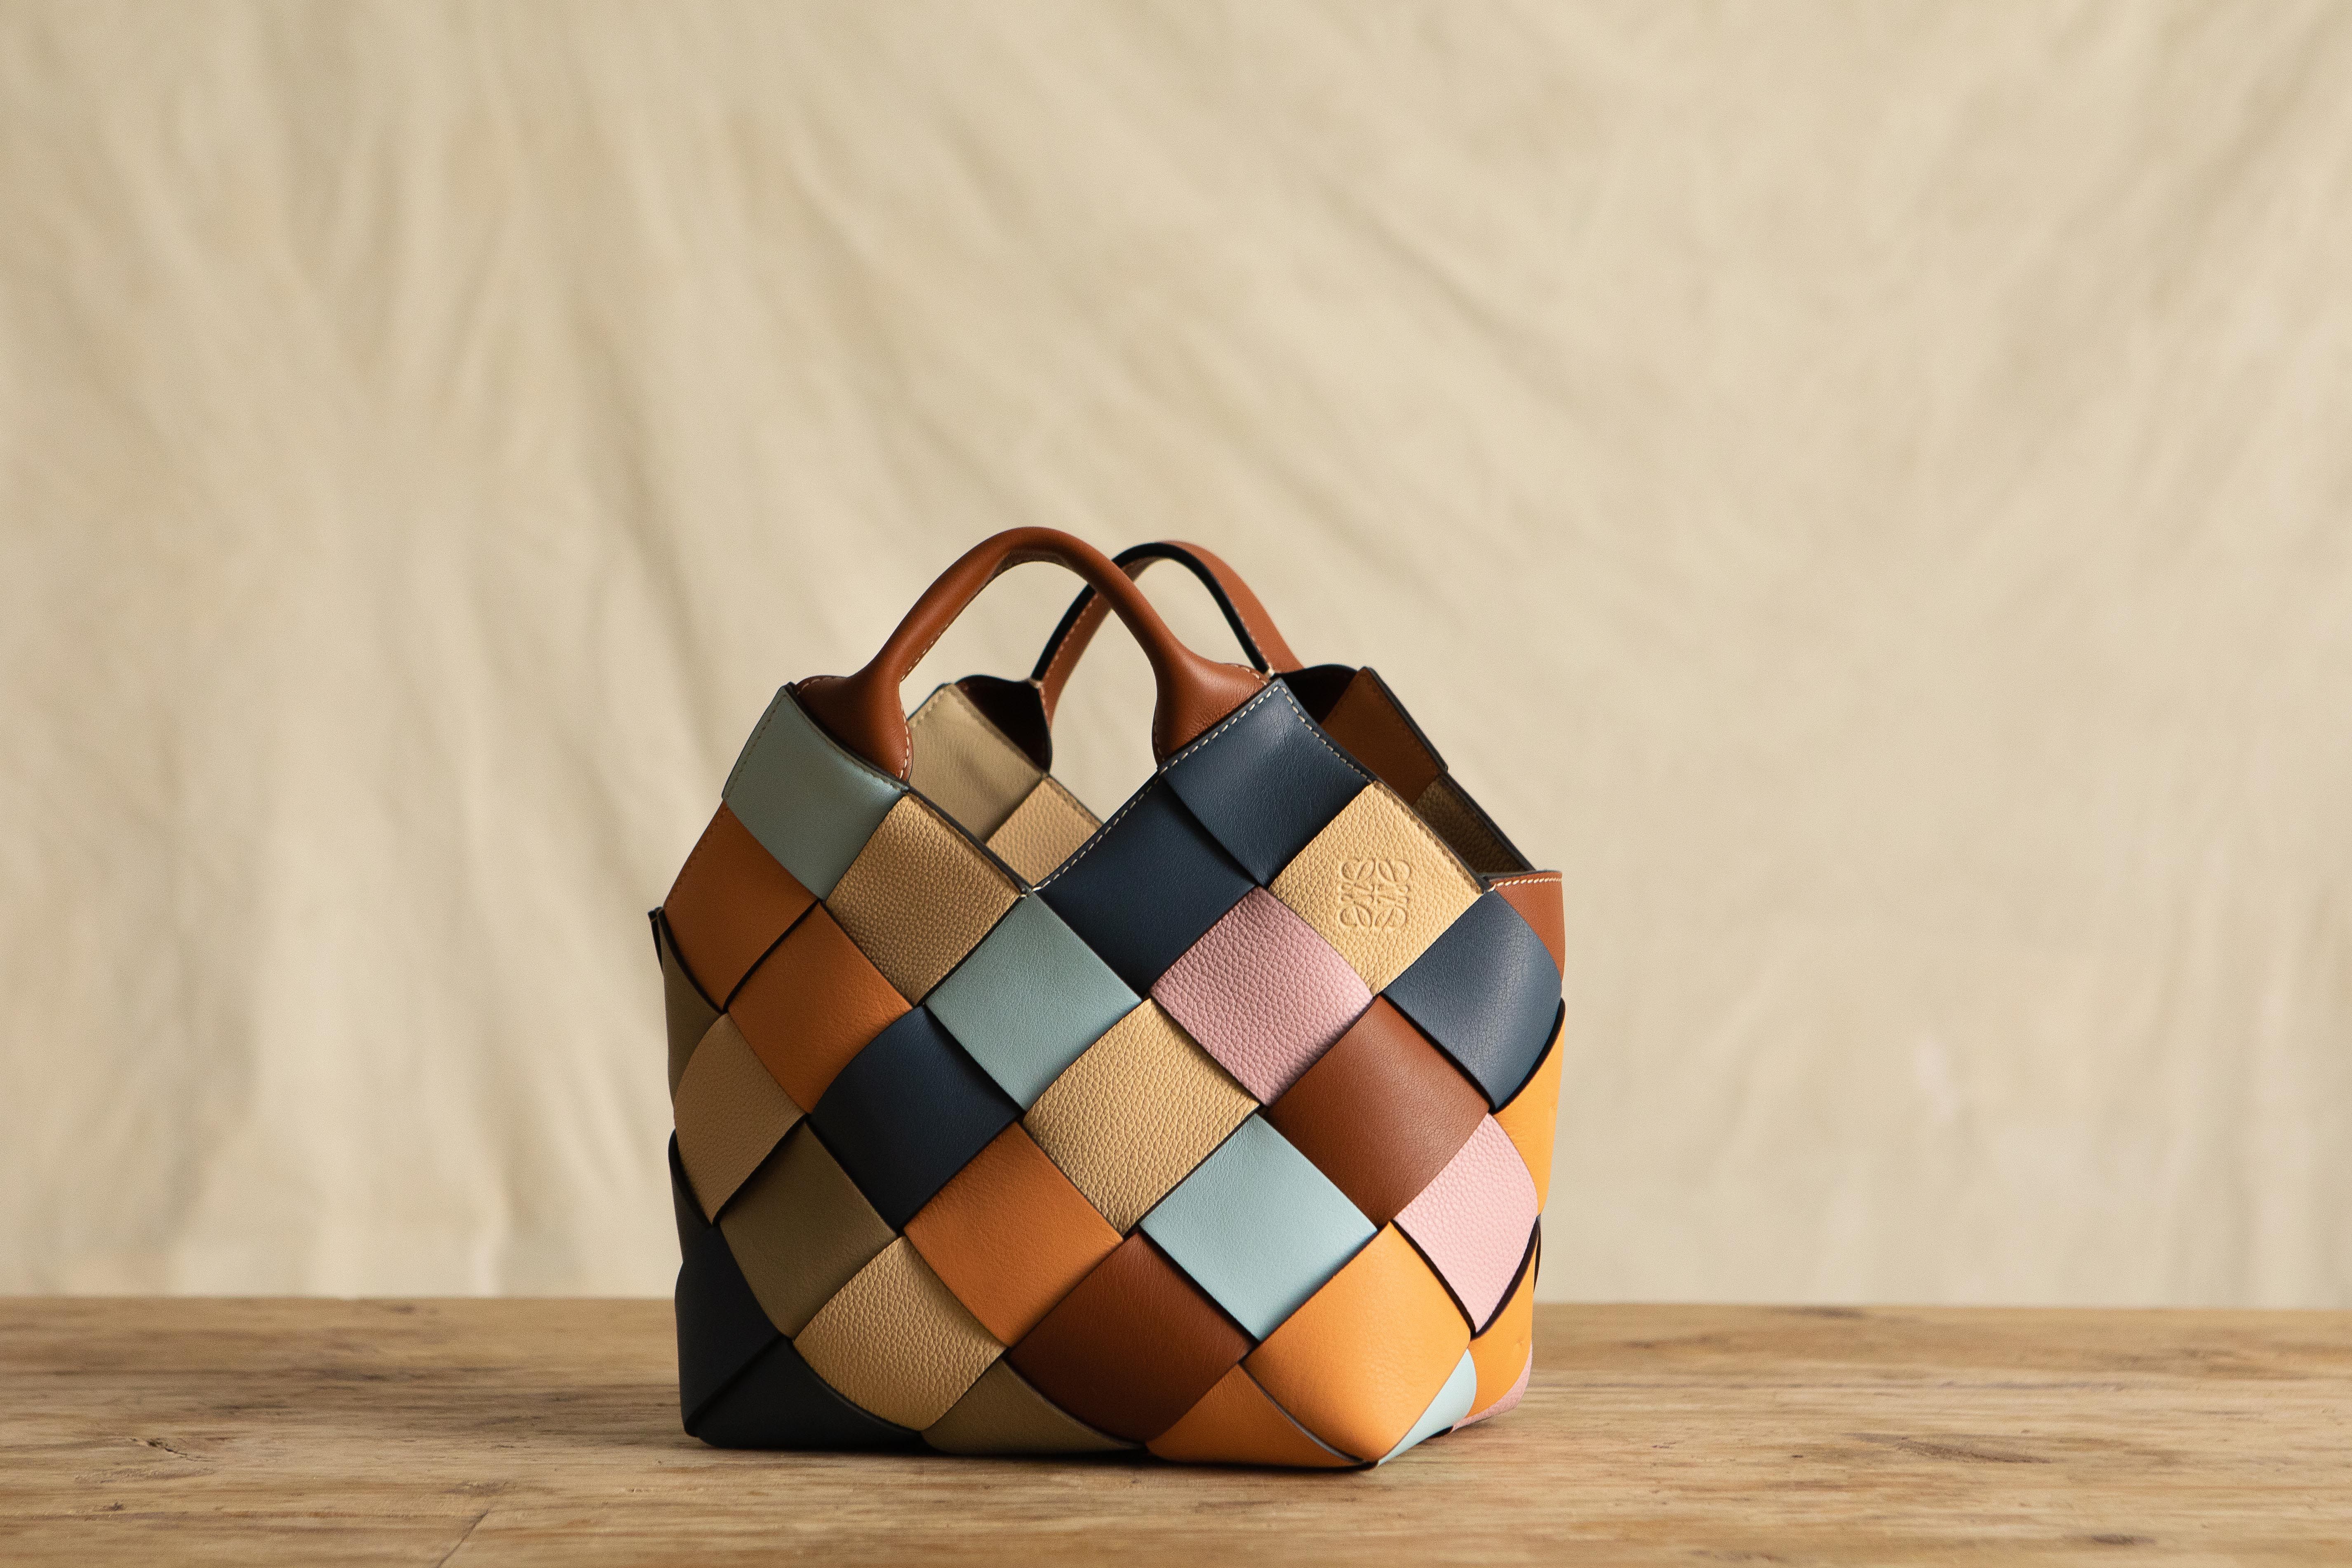 Loewe has released a sustainable version of one of its most